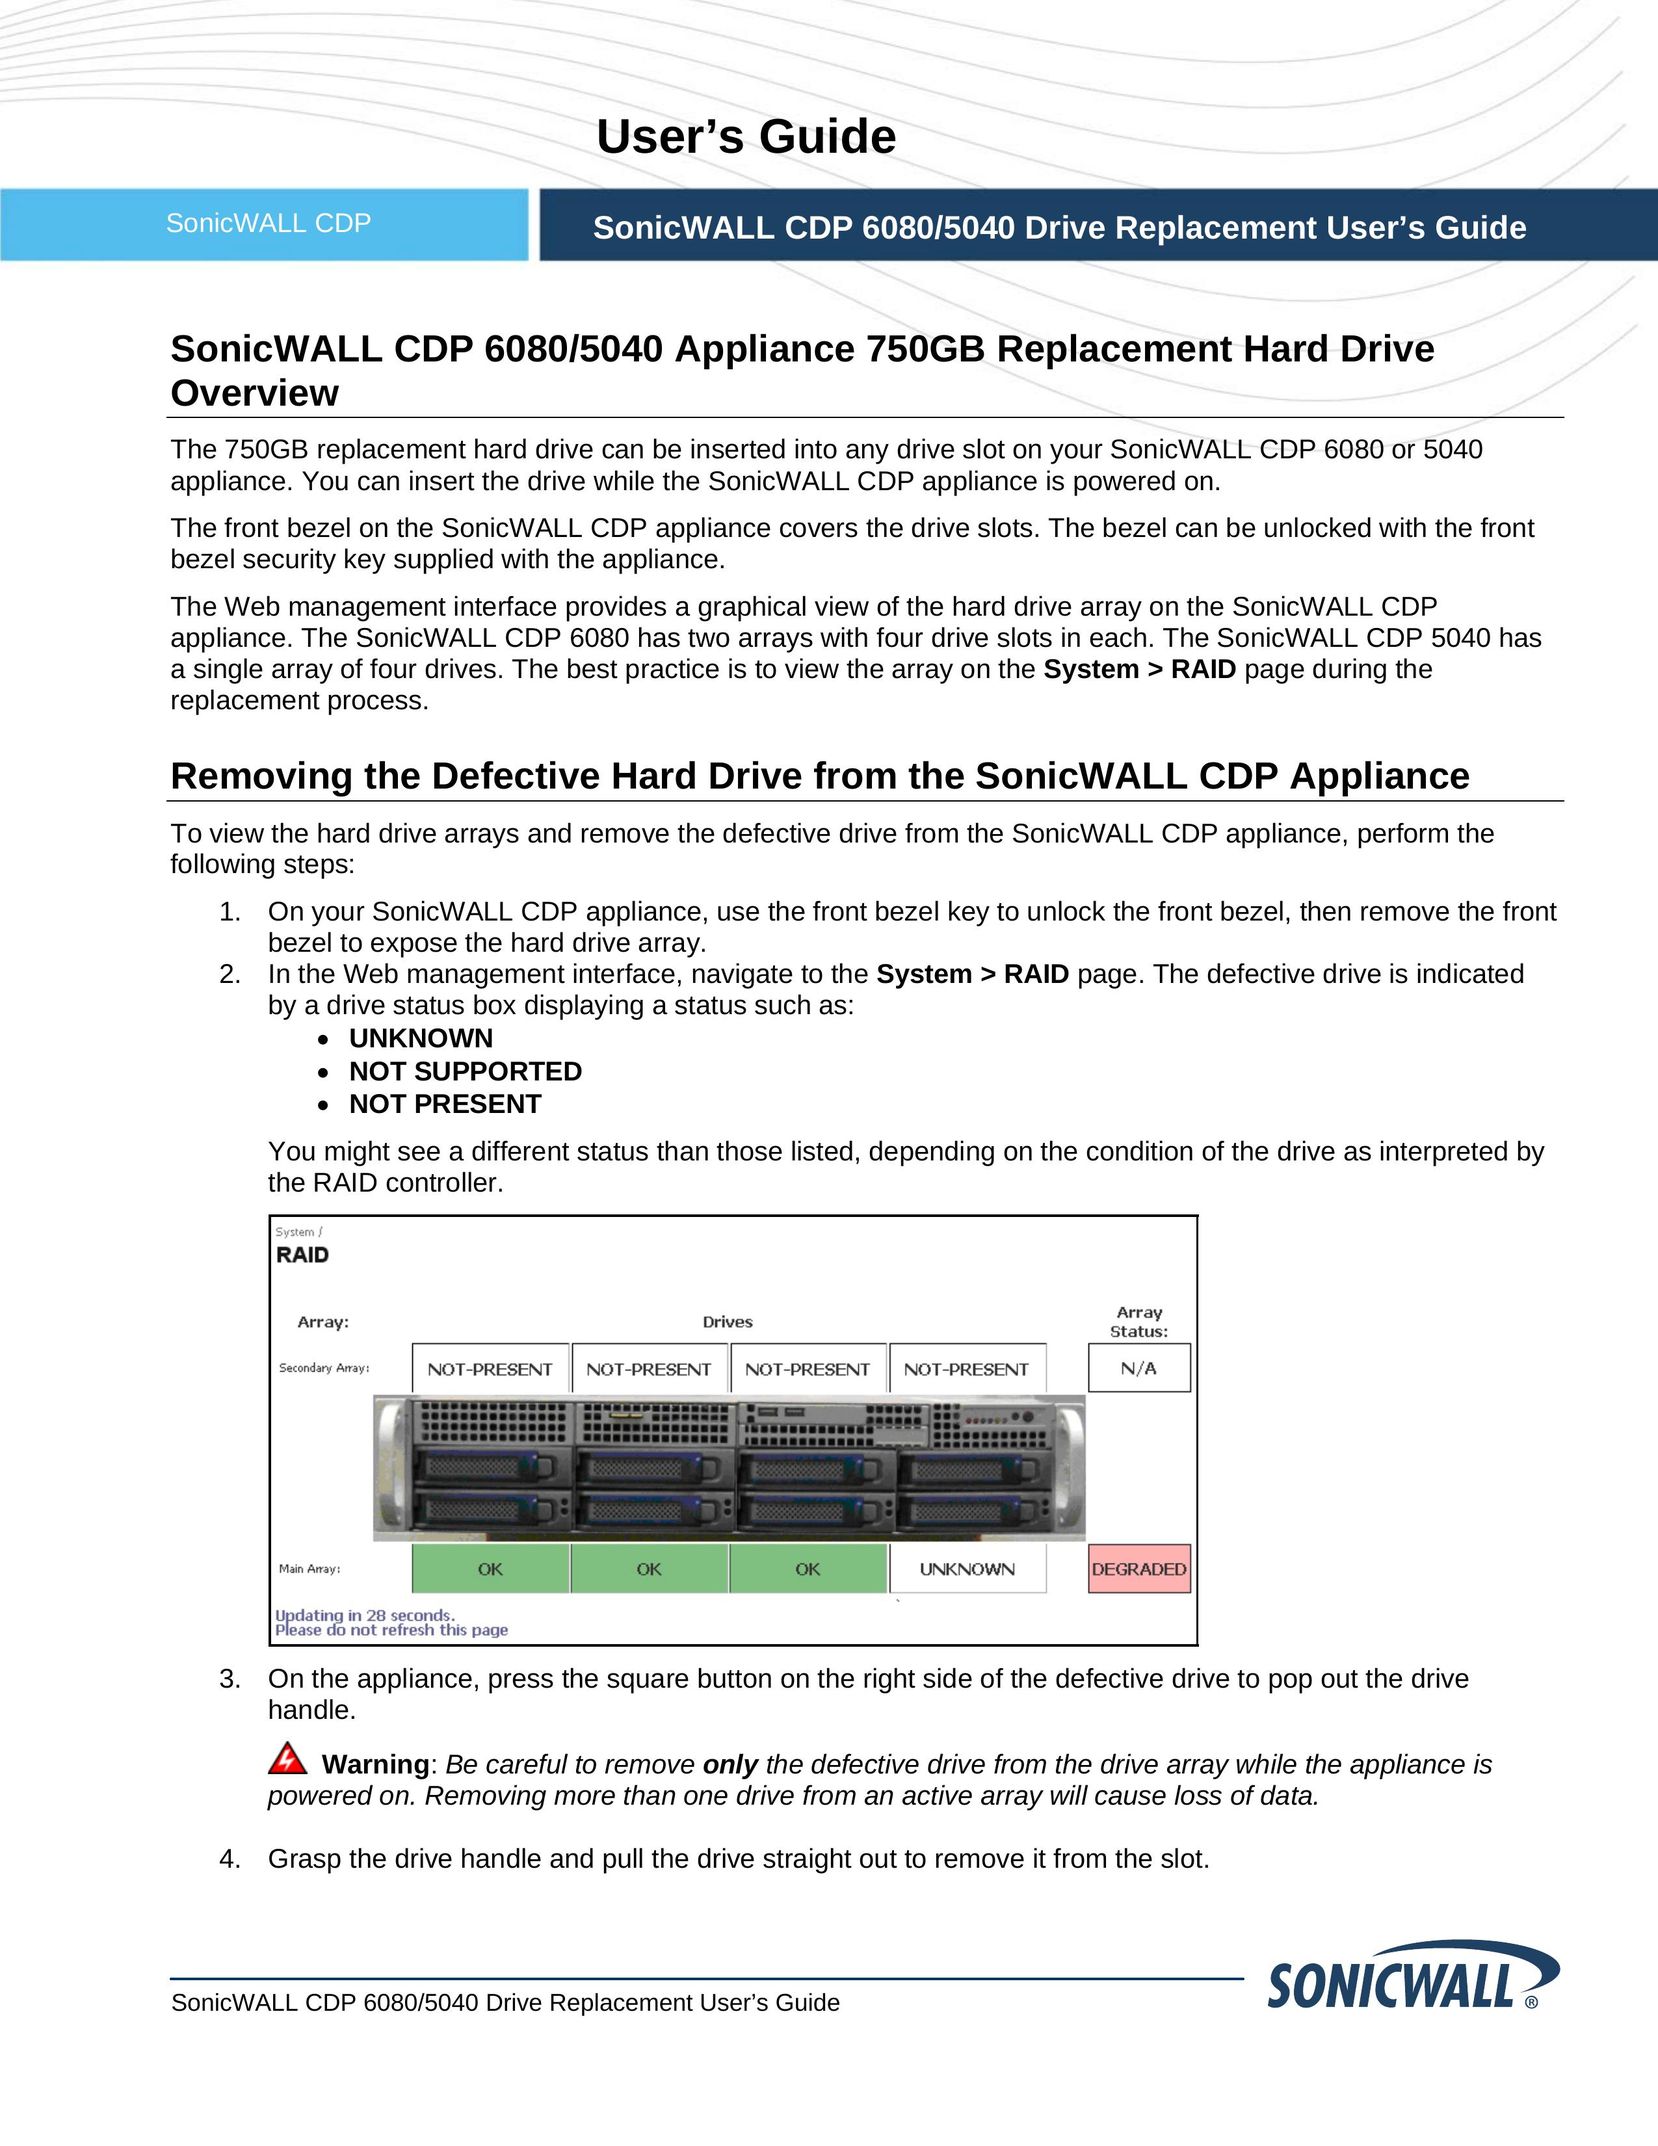 SonicWALL 01-SSC-9310 Computer Drive User Manual